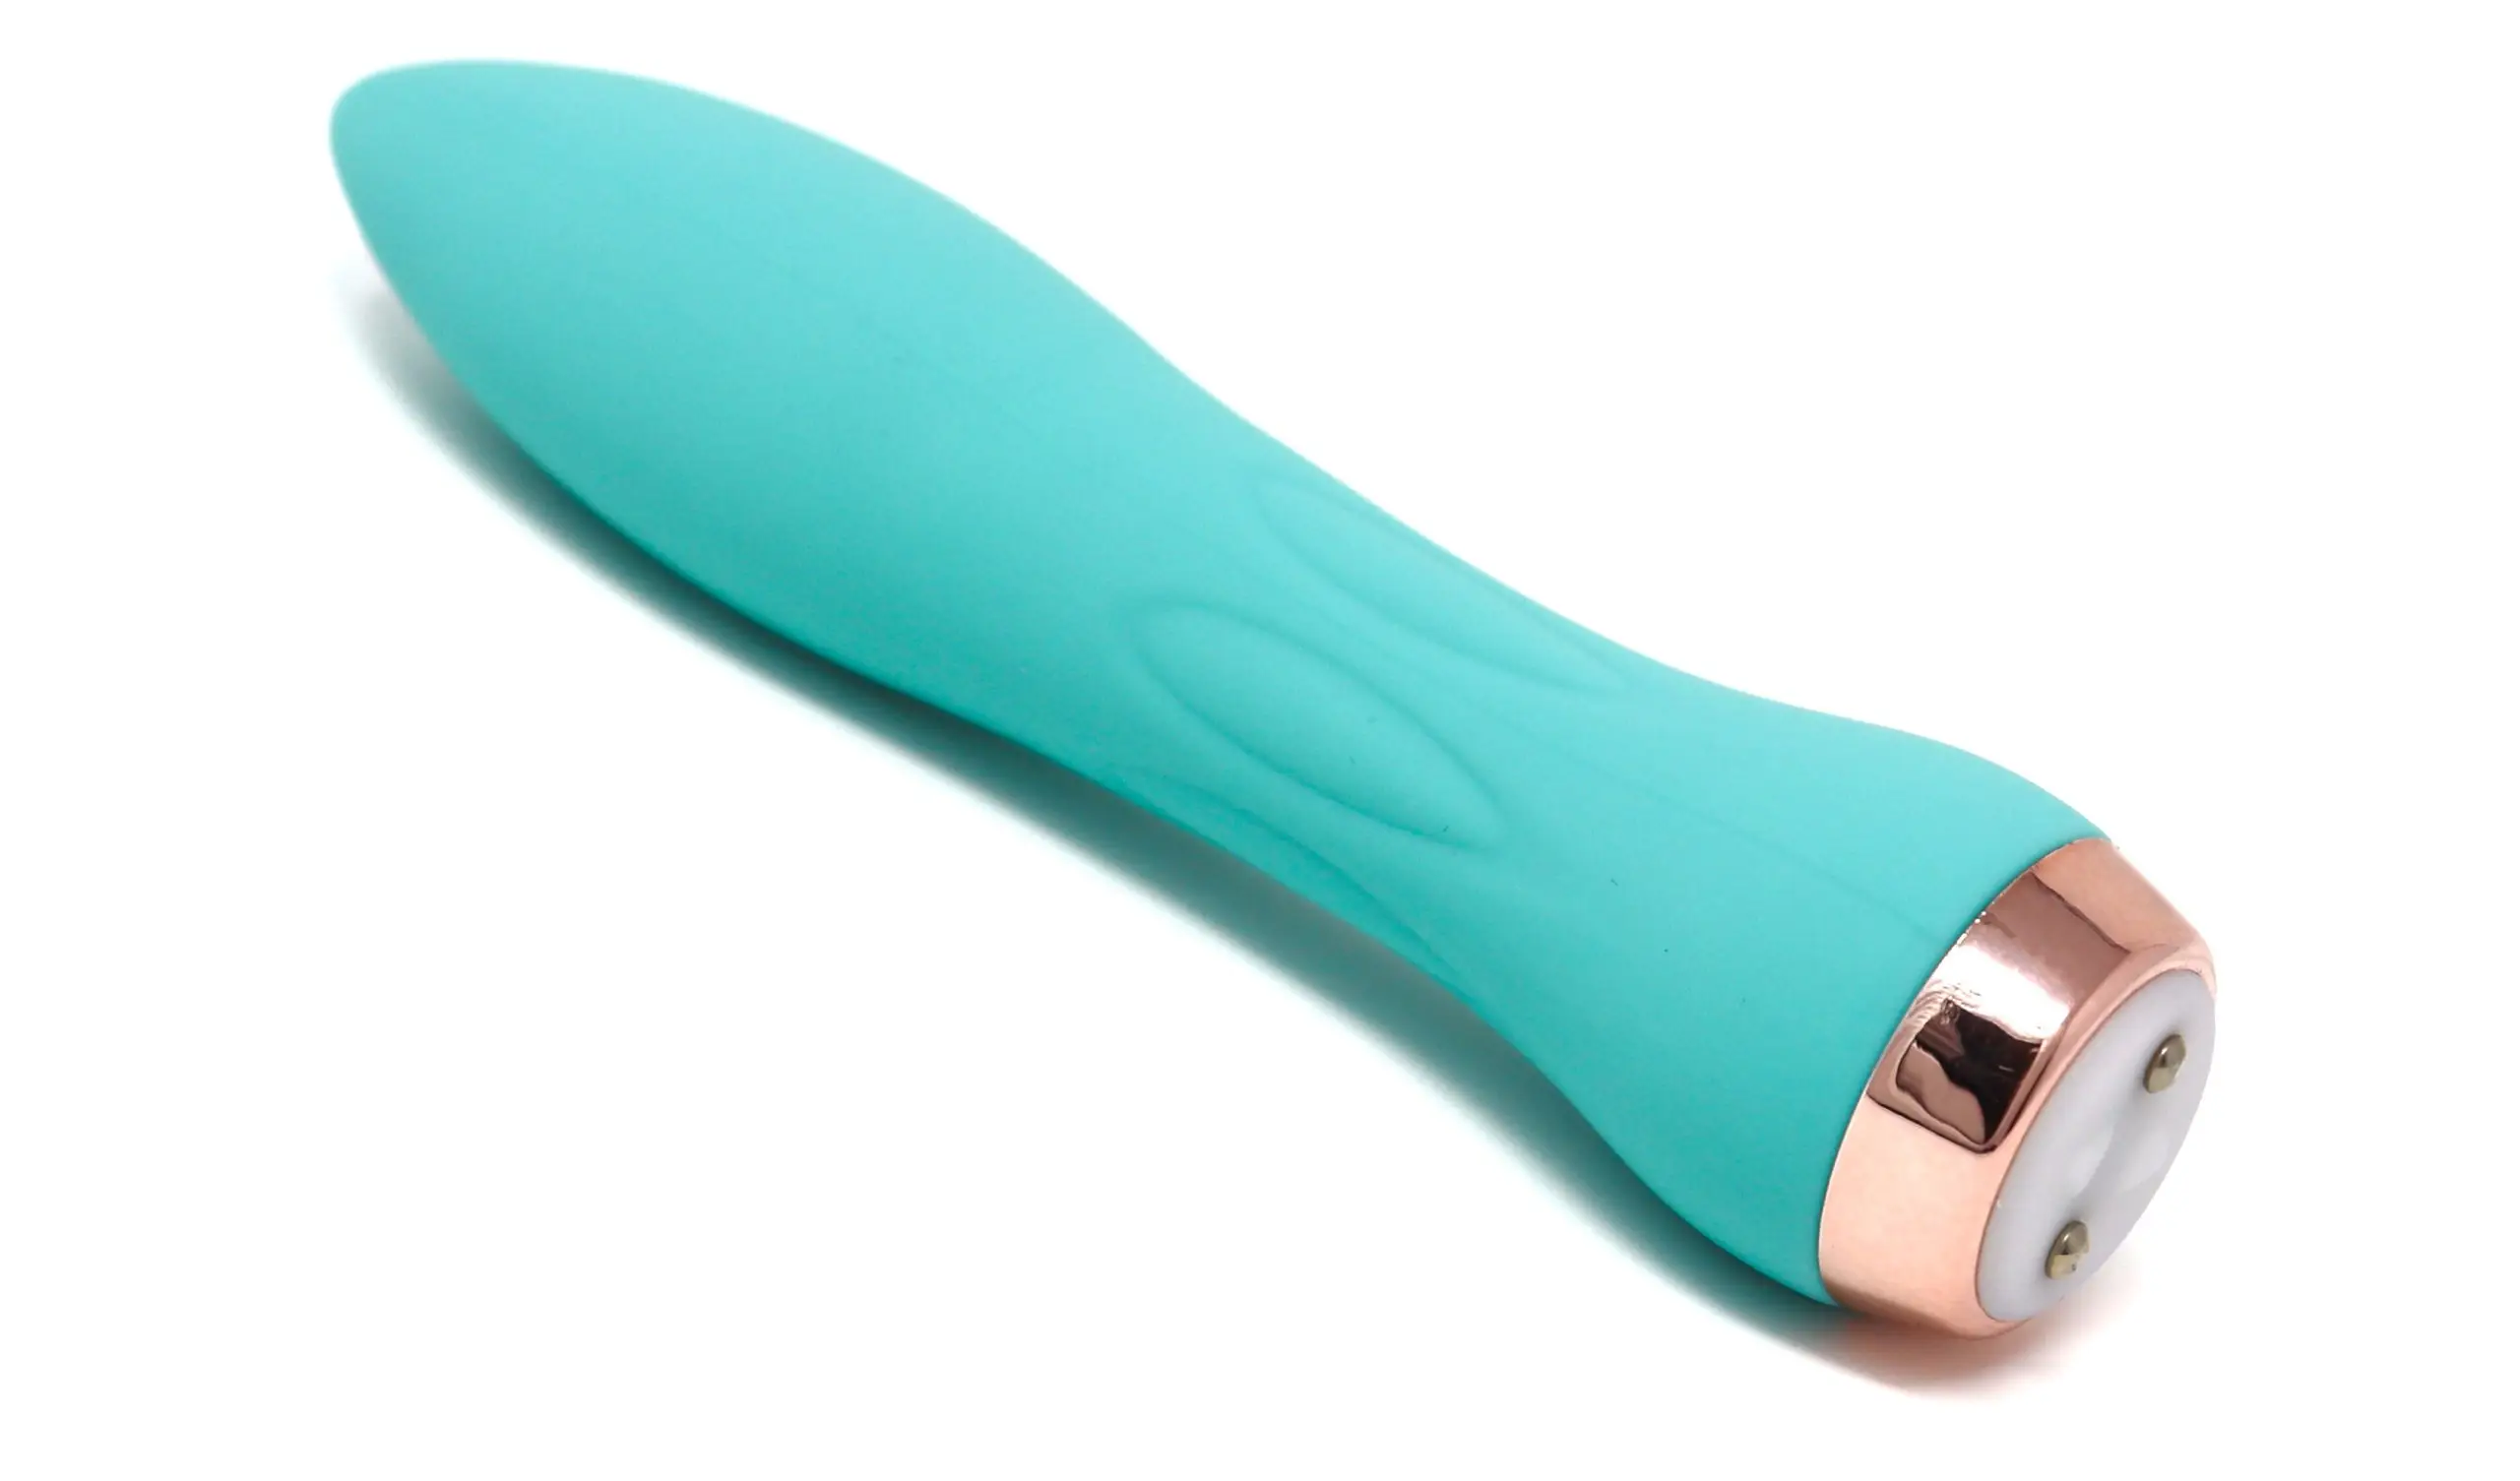 Jack and Jill Adult's Jackie Love bullet vibrator in teal